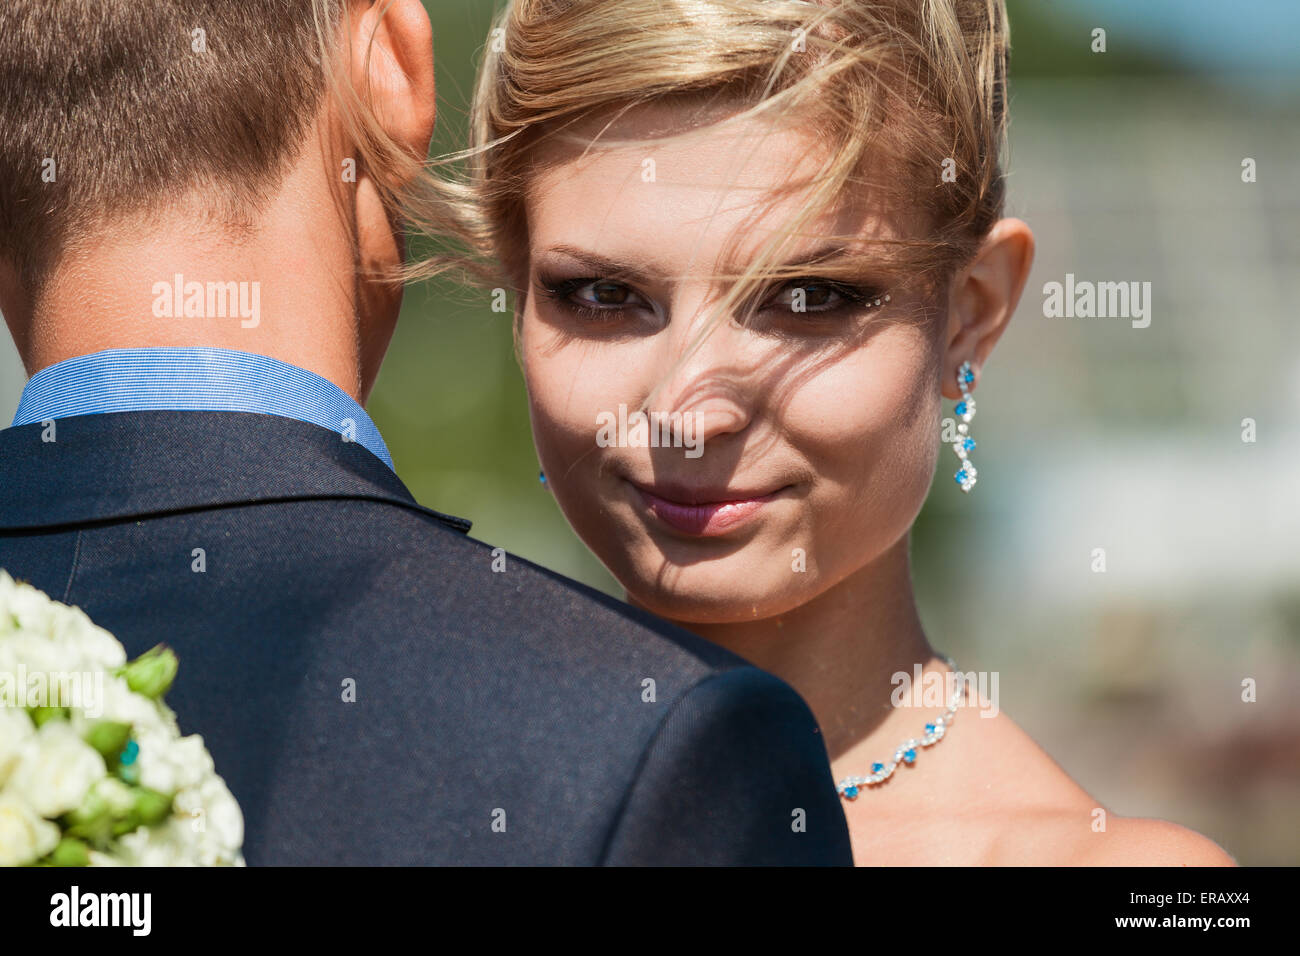 Happy bride and groom on their wedding day Stock Photo